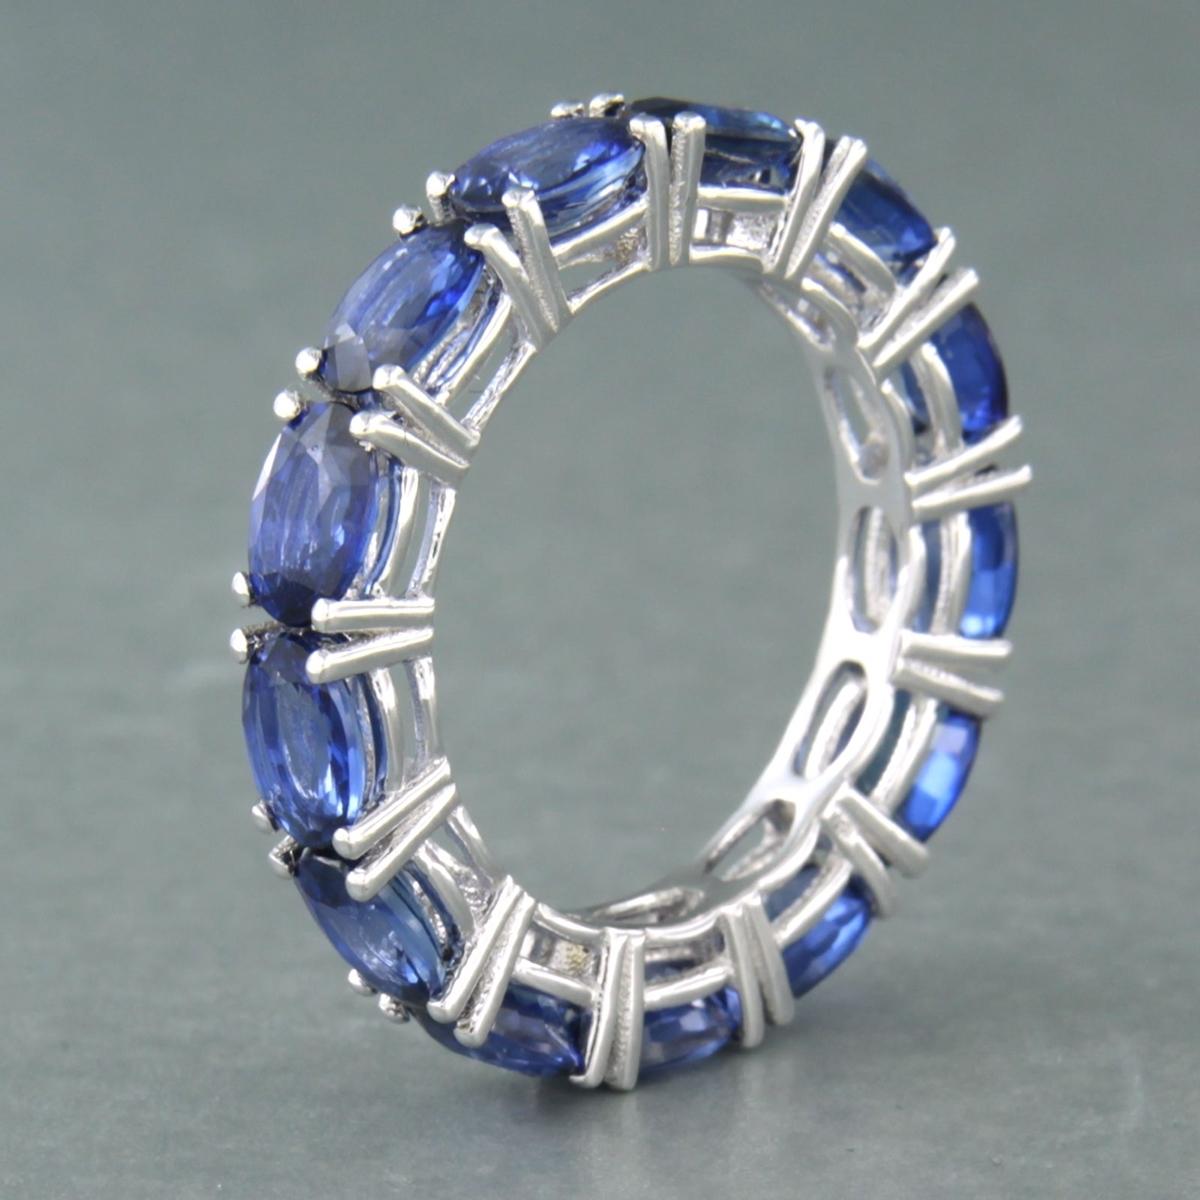 Beautiful modern eternity ring in 18k white gold, with 13 sapphires.

Sapphires
- 13 x 6.0 mm x 4.0 mm oval facet cut treated sapphires, total approx. 6.30 ct
Colour : blue

Weight of the ring is 5.2 gr

Height 4.0 cm thickness 4.4 cm

Ringsize EU